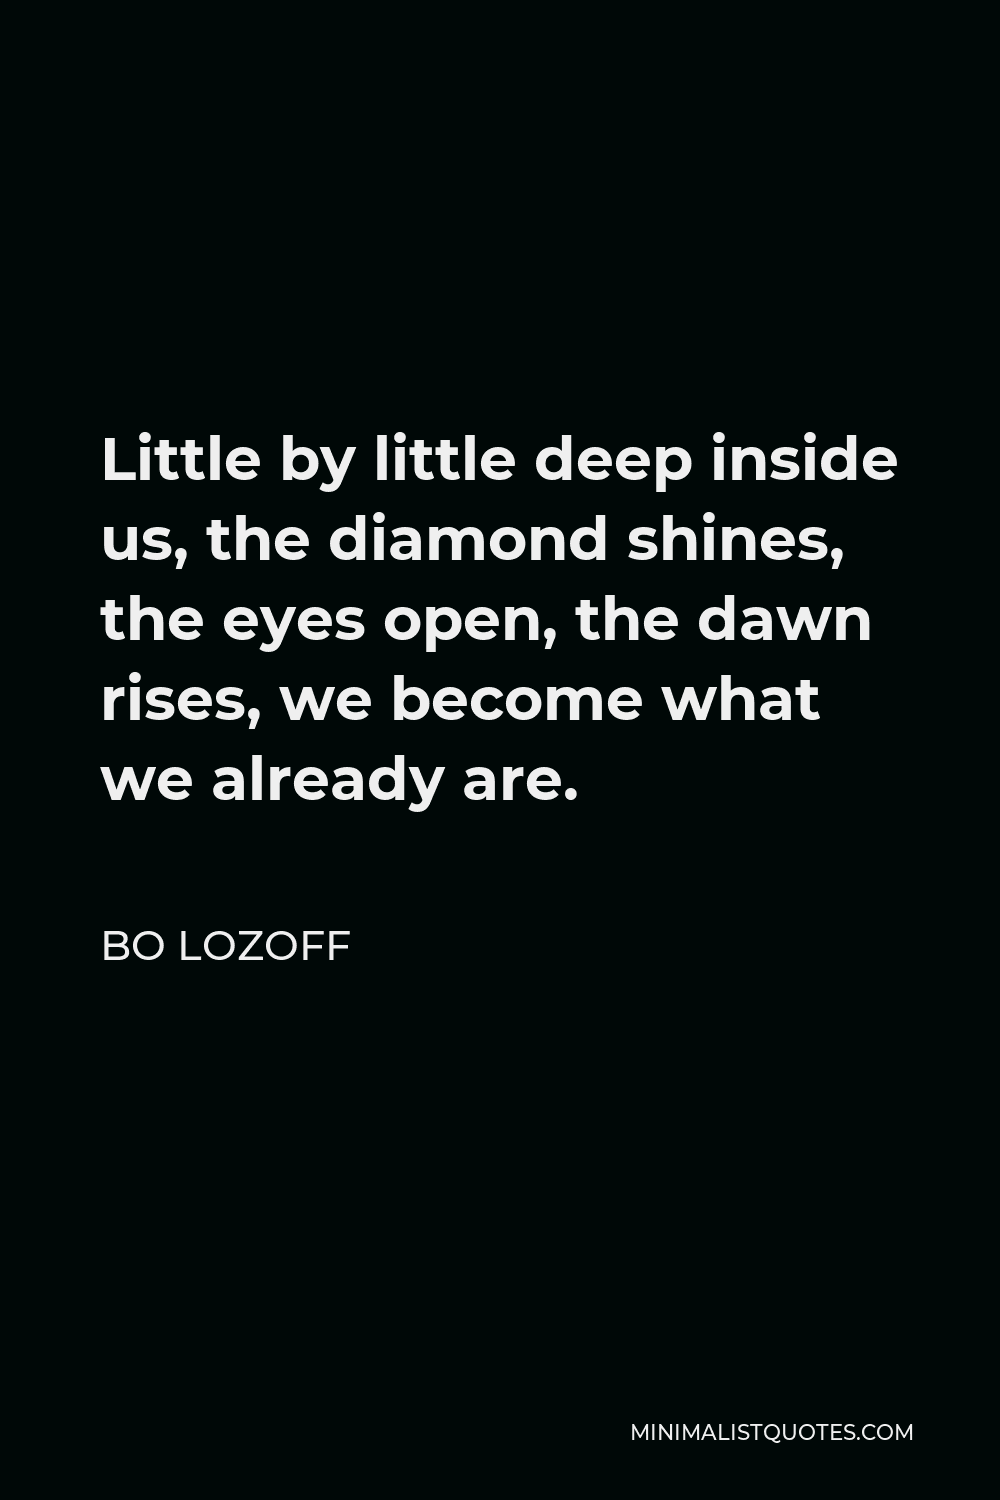 Bo Lozoff Quote - Little by little deep inside us, the diamond shines, the eyes open, the dawn rises, we become what we already are.